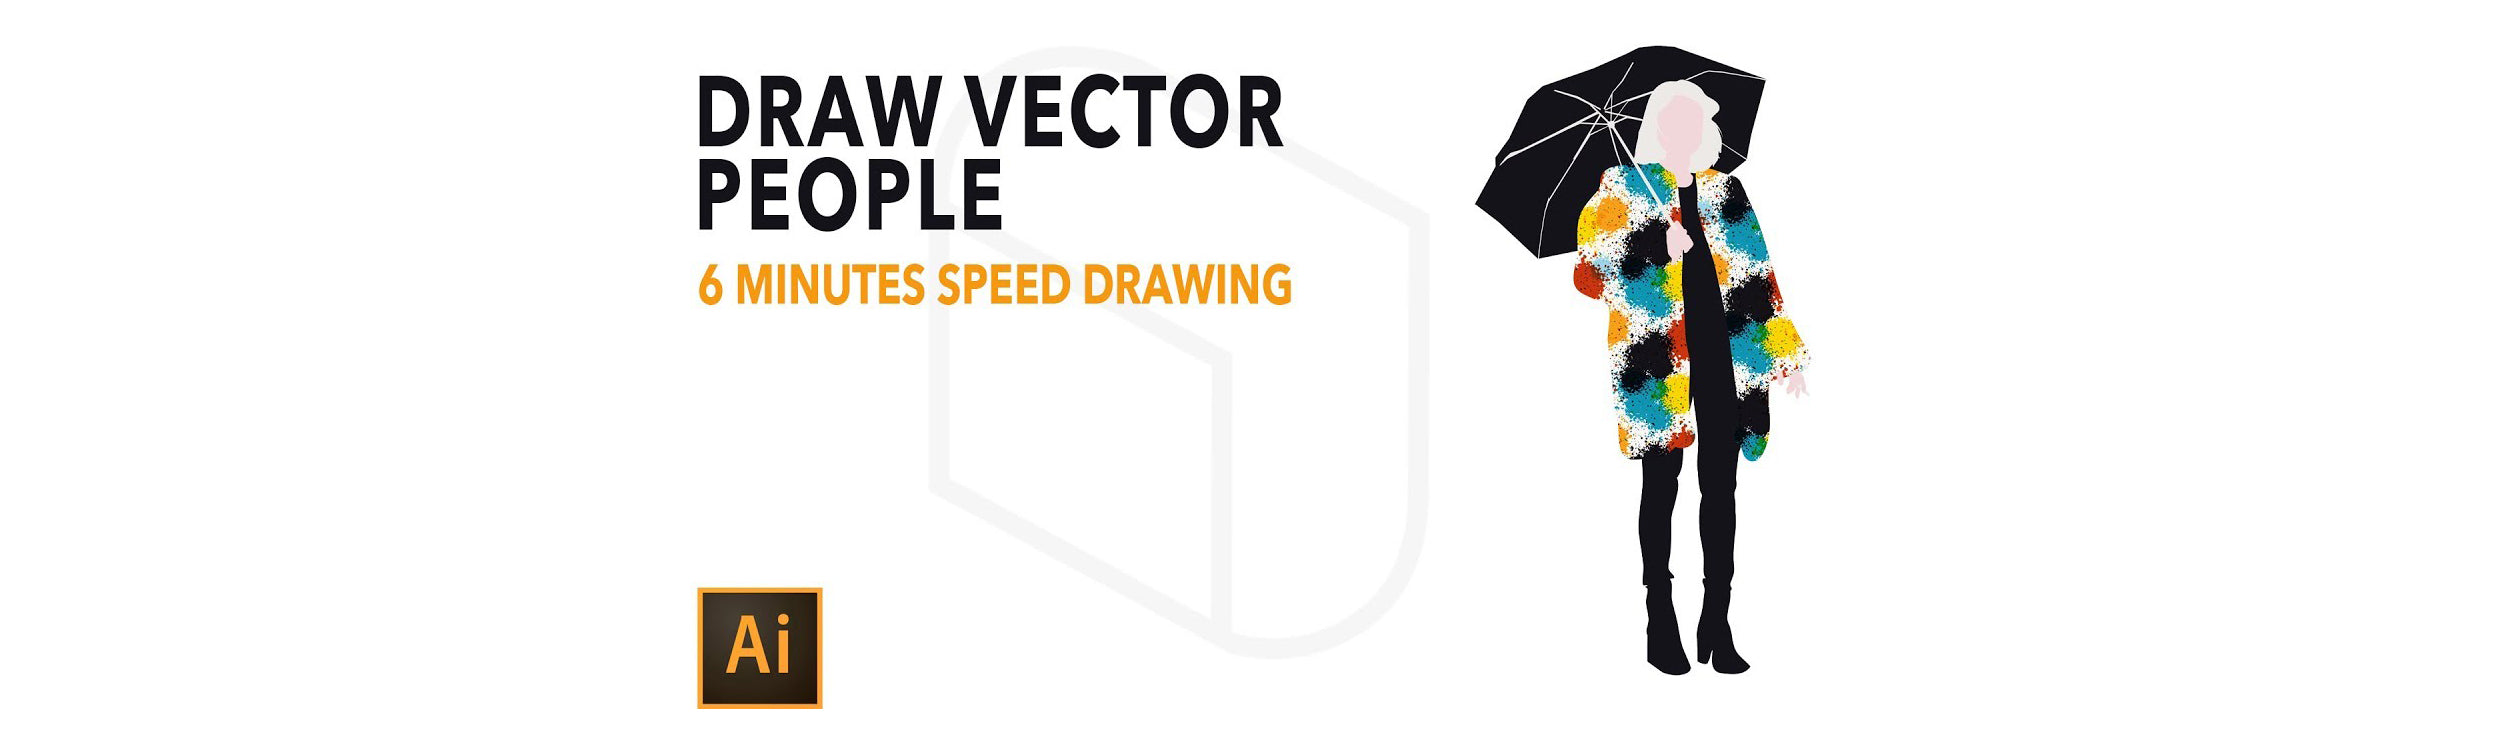 Adobe Illustrator Tutorial - How to Draw Vector People